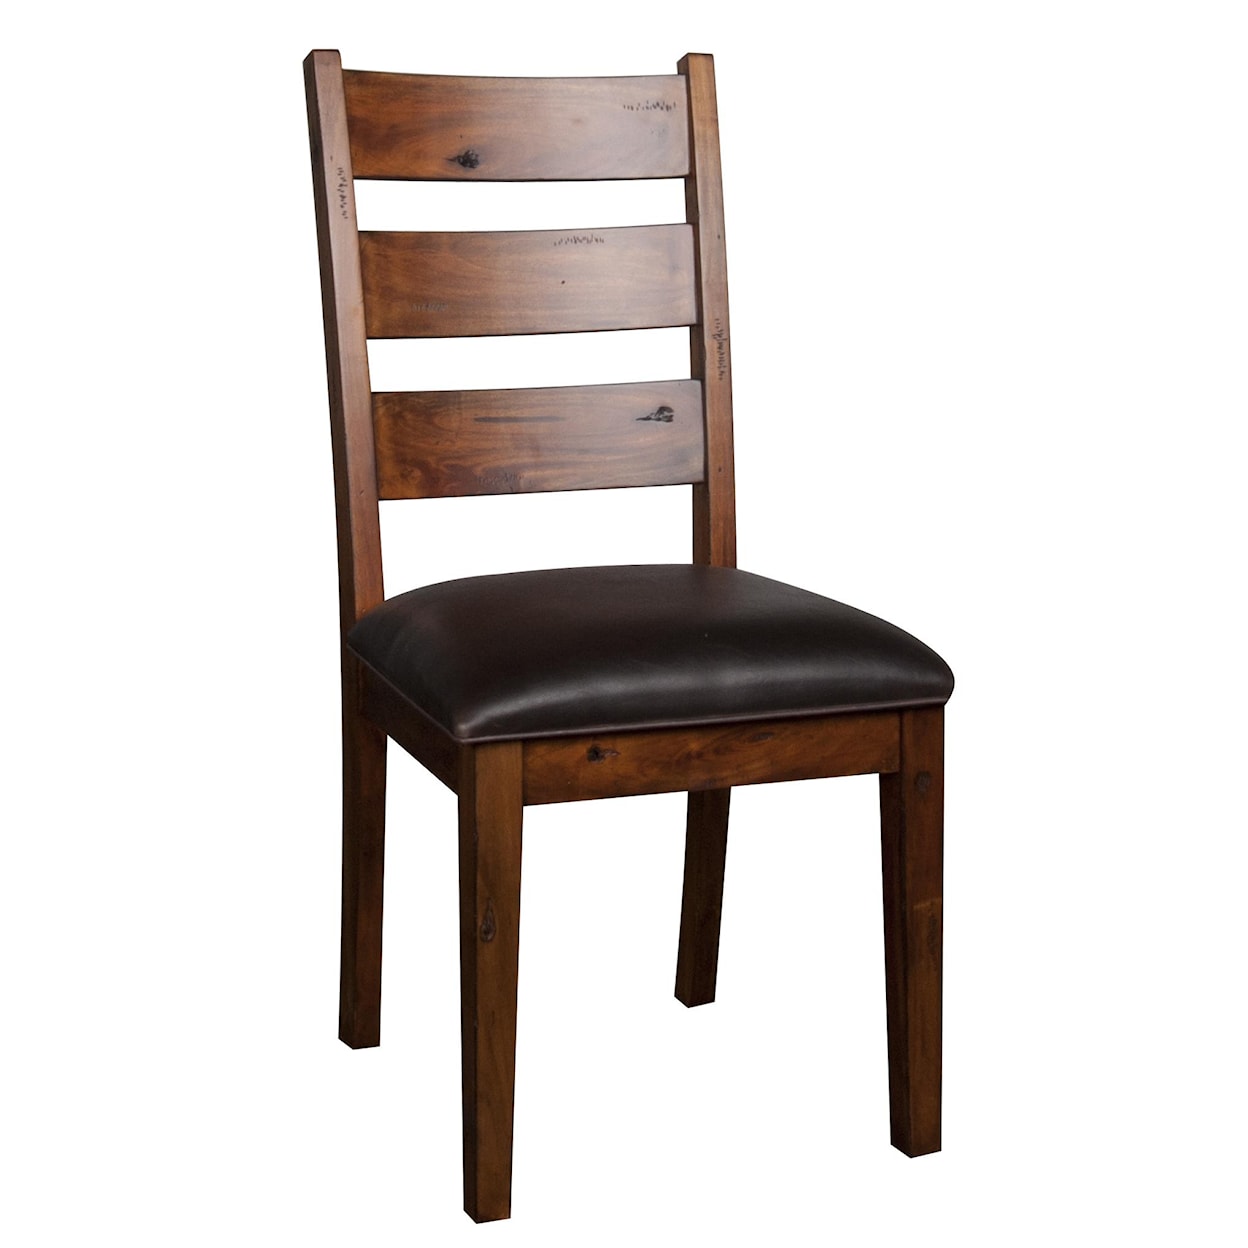 Sunny Designs Tremont Tremont Dining Side Chair